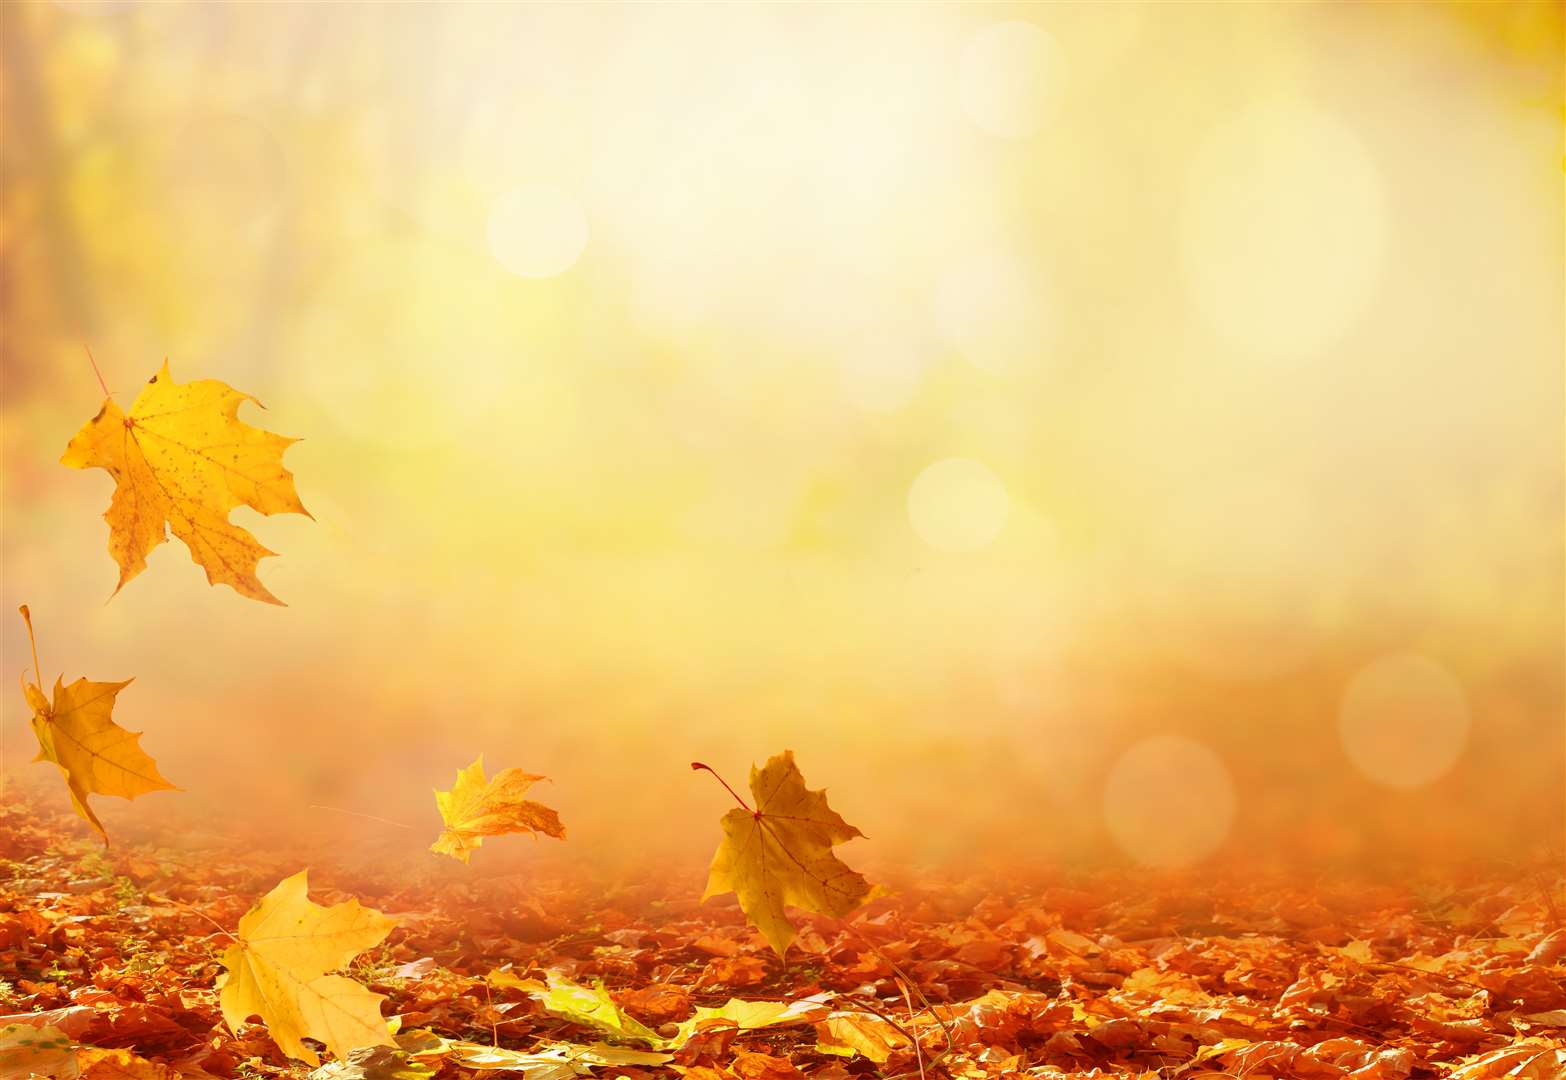 Autumn helps us to see the passage of time – a time to reflect on where we have come from and where we need to go.